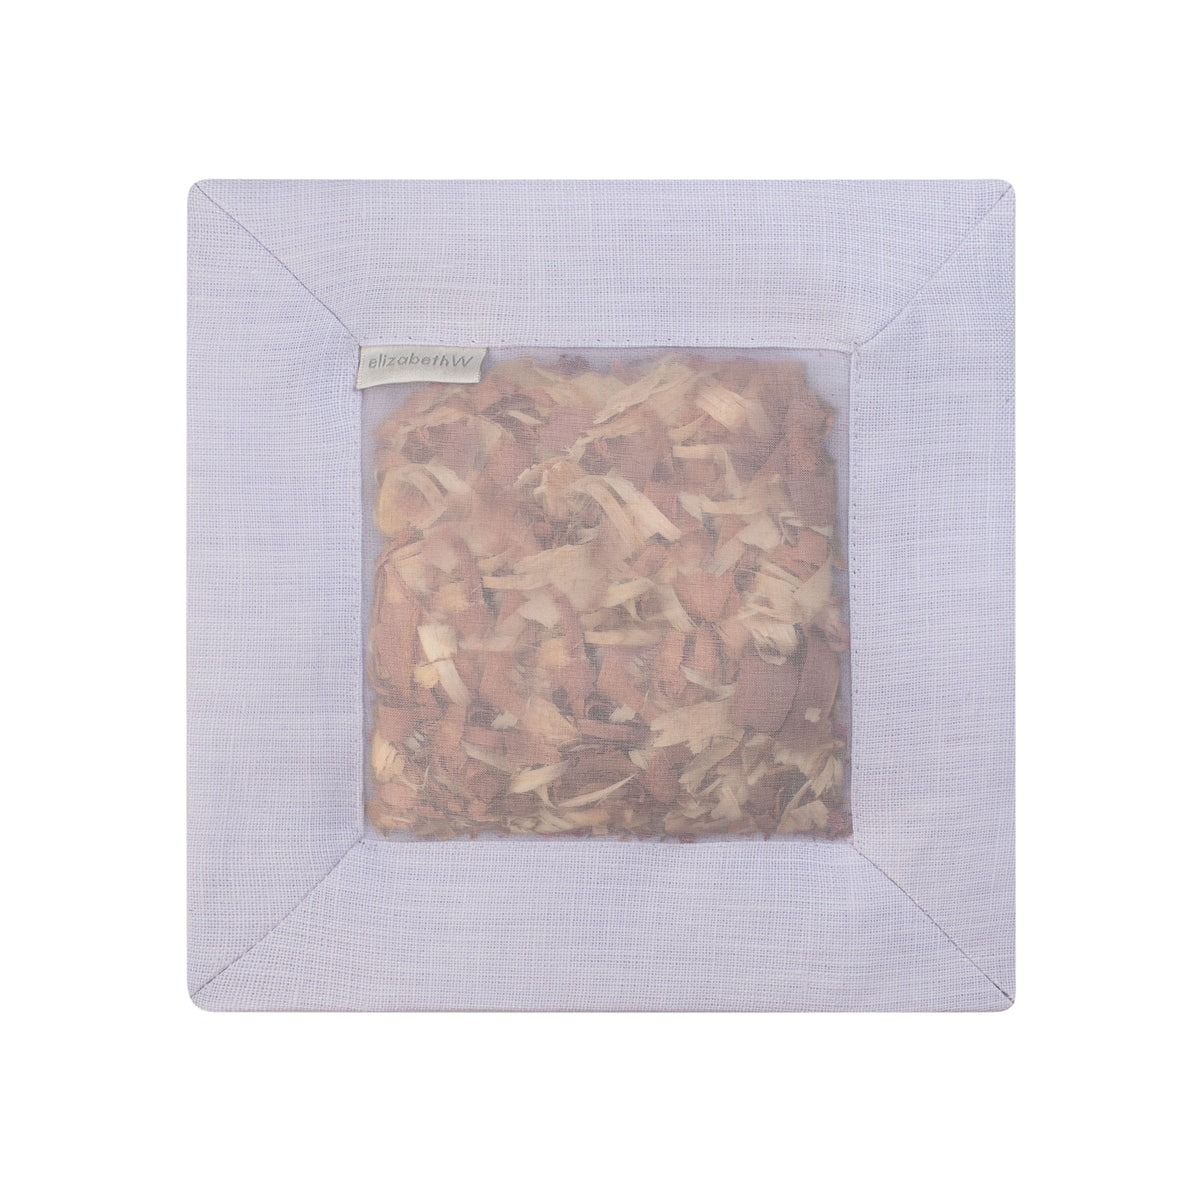 Cedar filled inside of a purple colored square sachet with a transparent screen